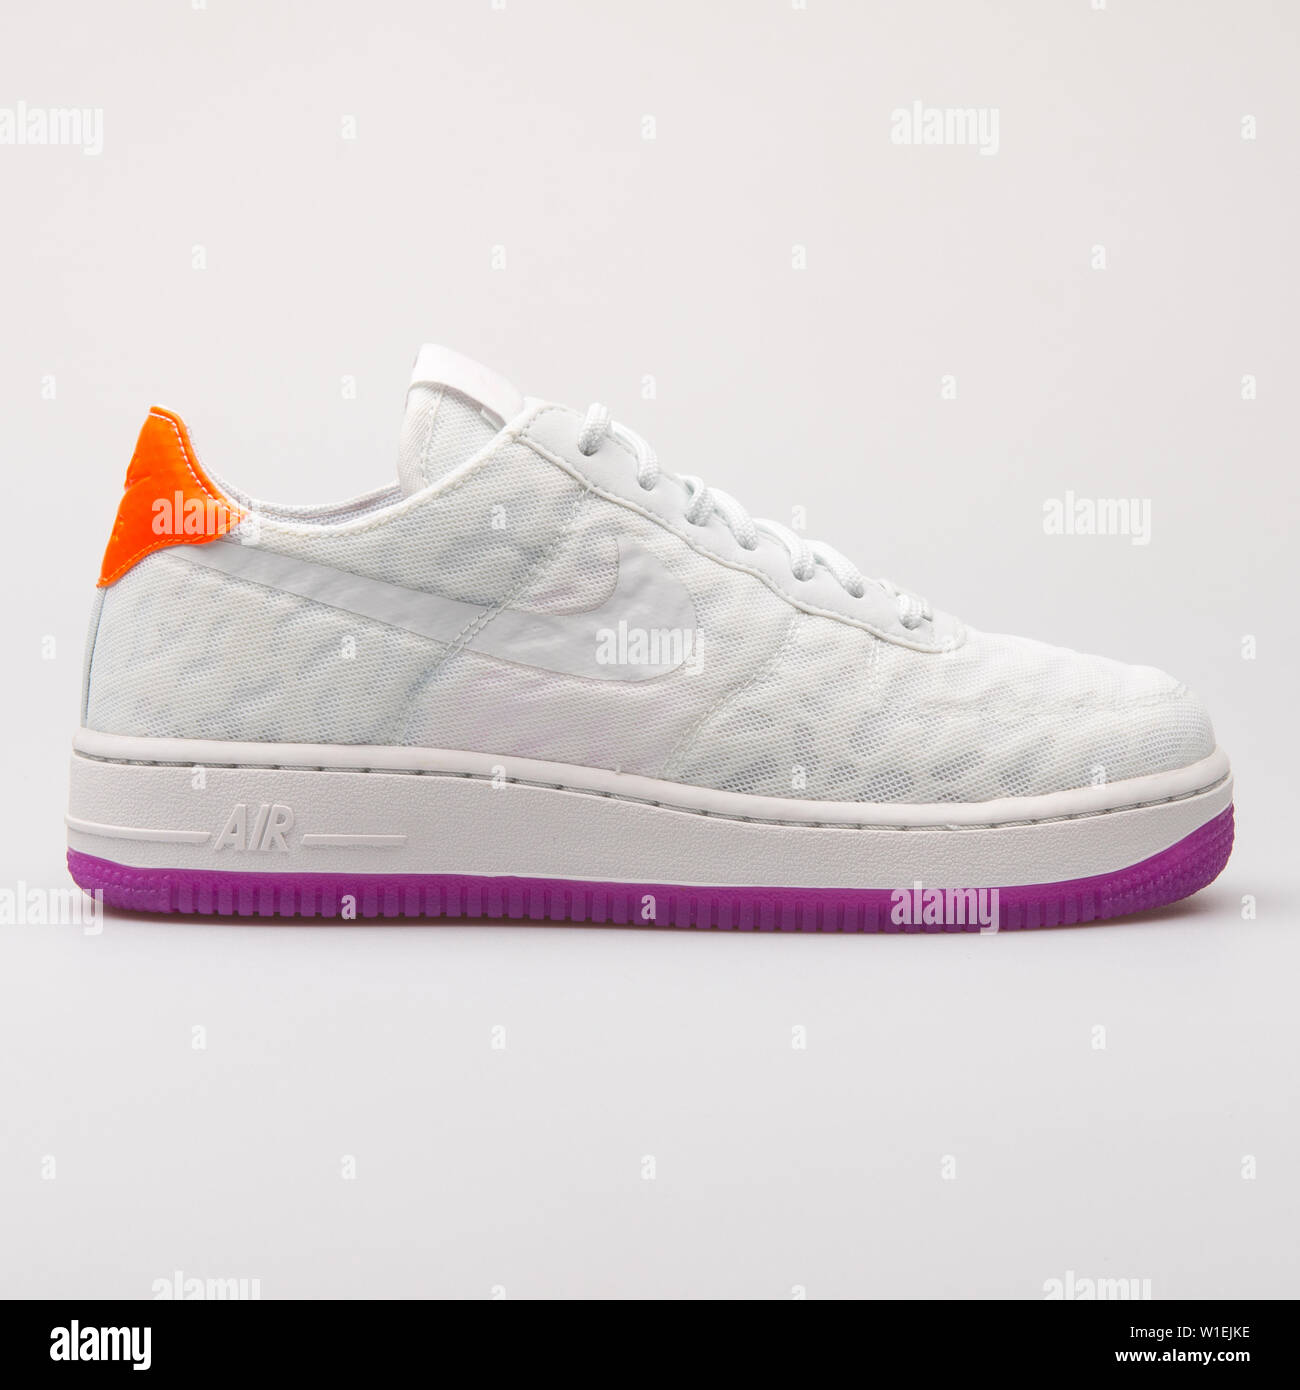 VIENNA, AUSTRIA - AUGUST 23, 2017: Nike Air Force 1 07 TXT Premium off  white and violet sneaker on white background Stock Photo - Alamy